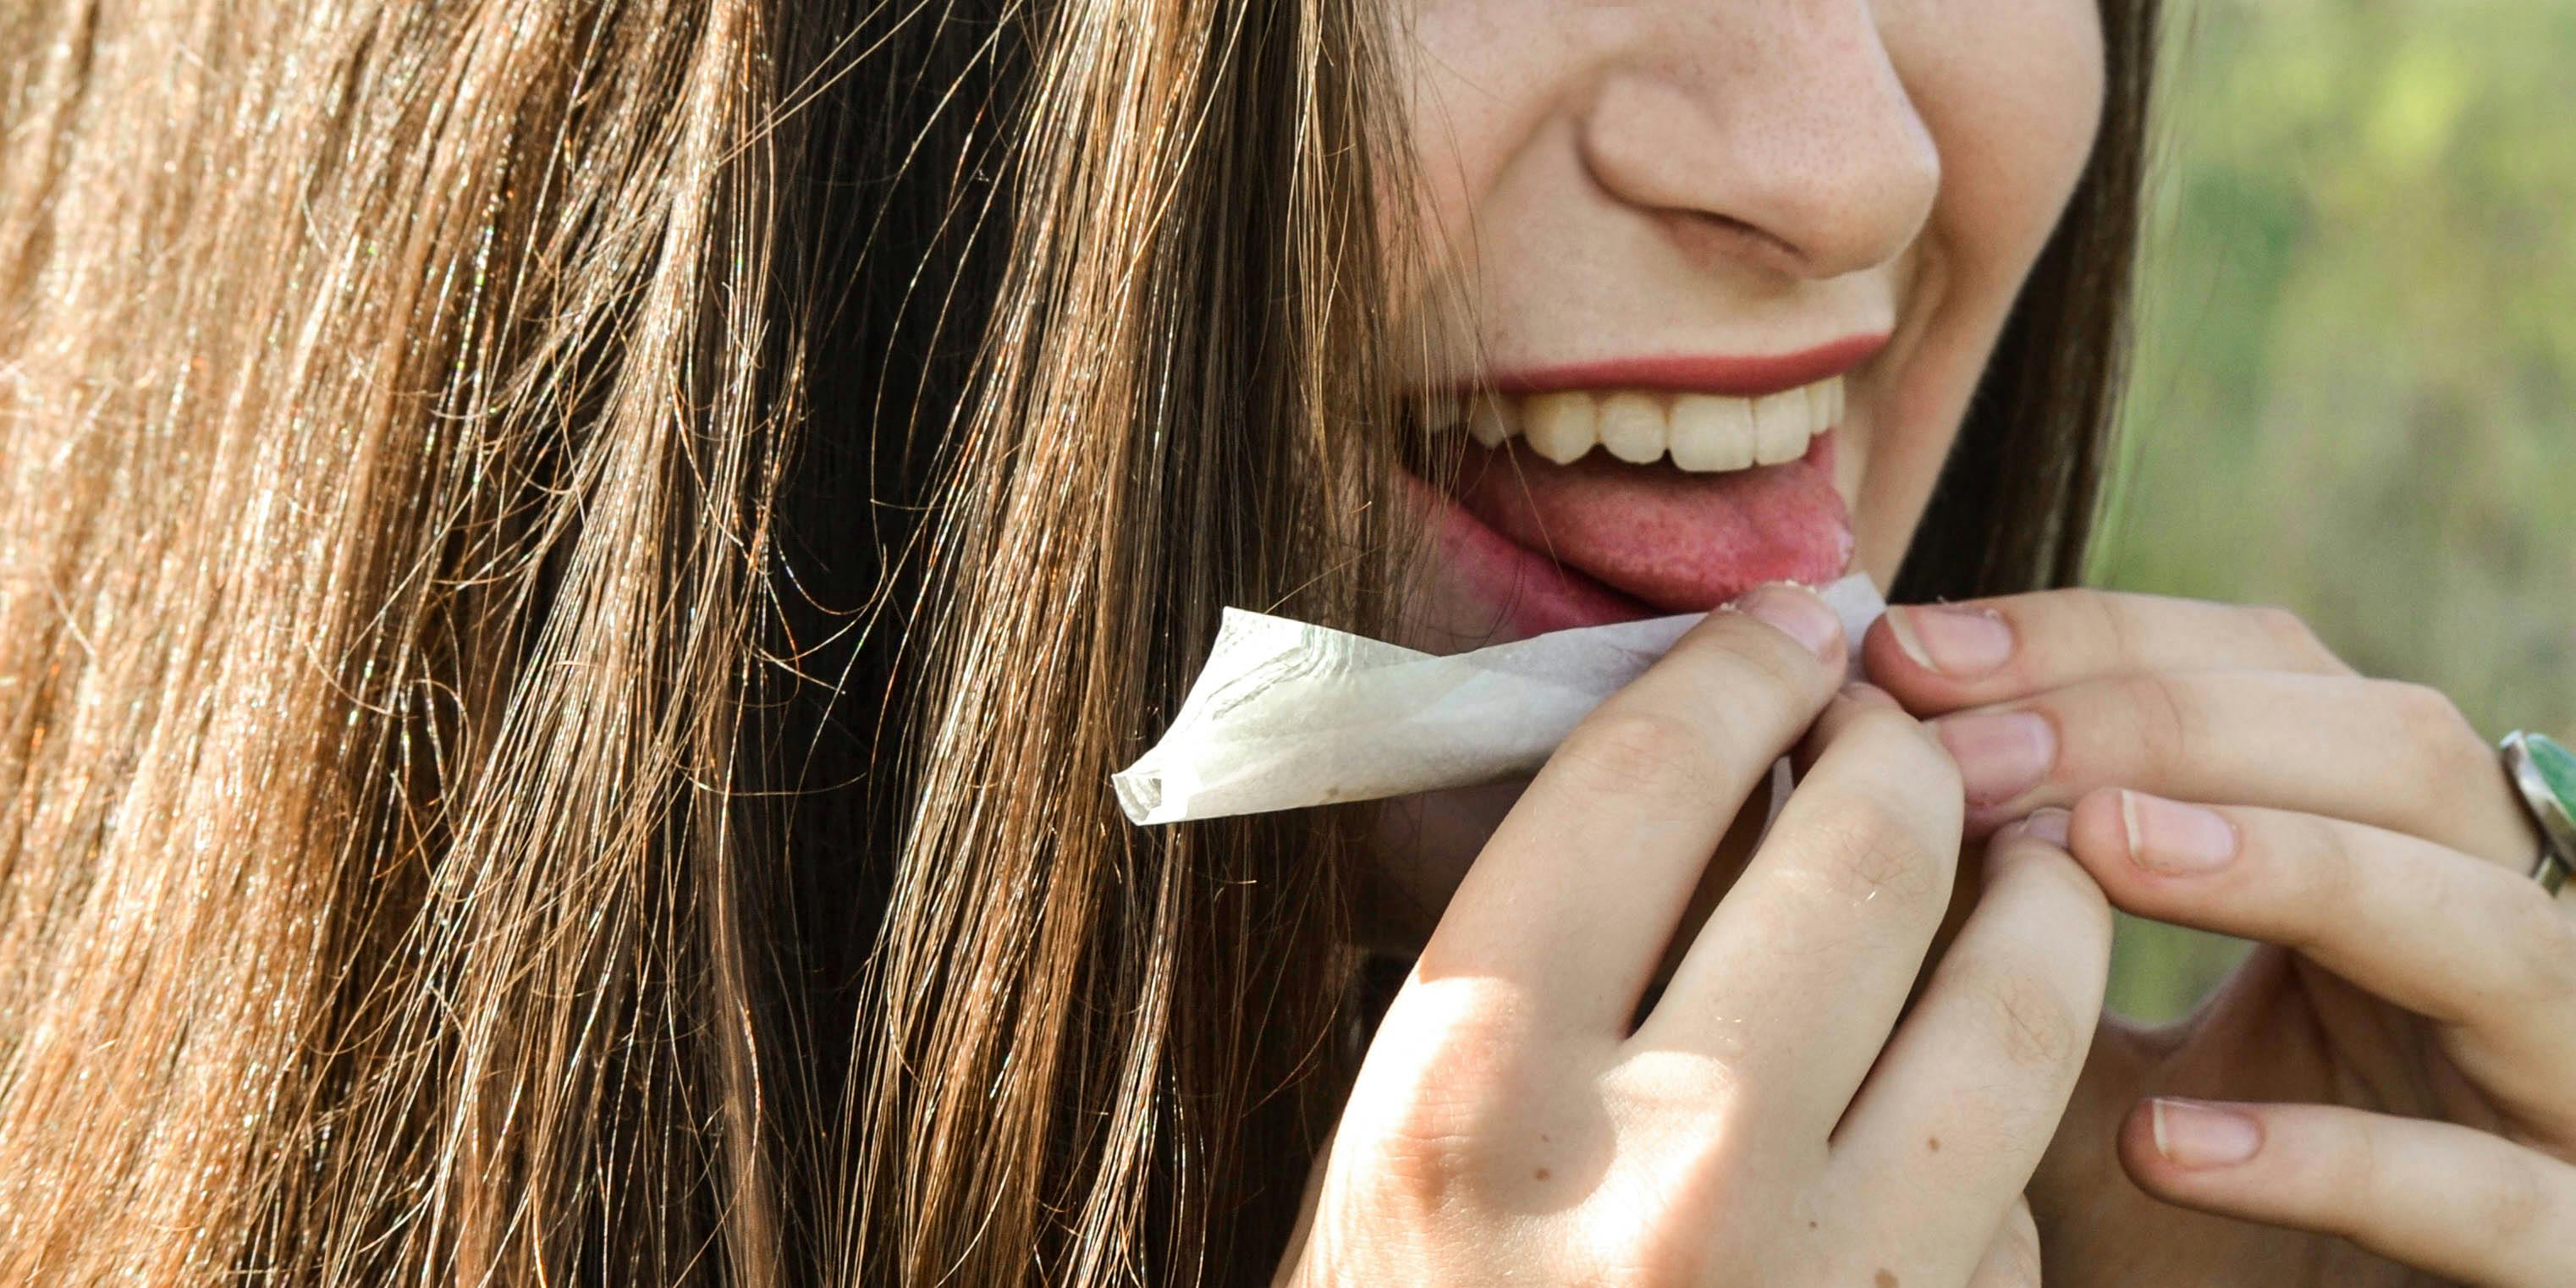 A girl finishes rolling a joint. If she finds herself in an argument with someone against cannabis, she may be able to identify their logical fallacy and change their mind.